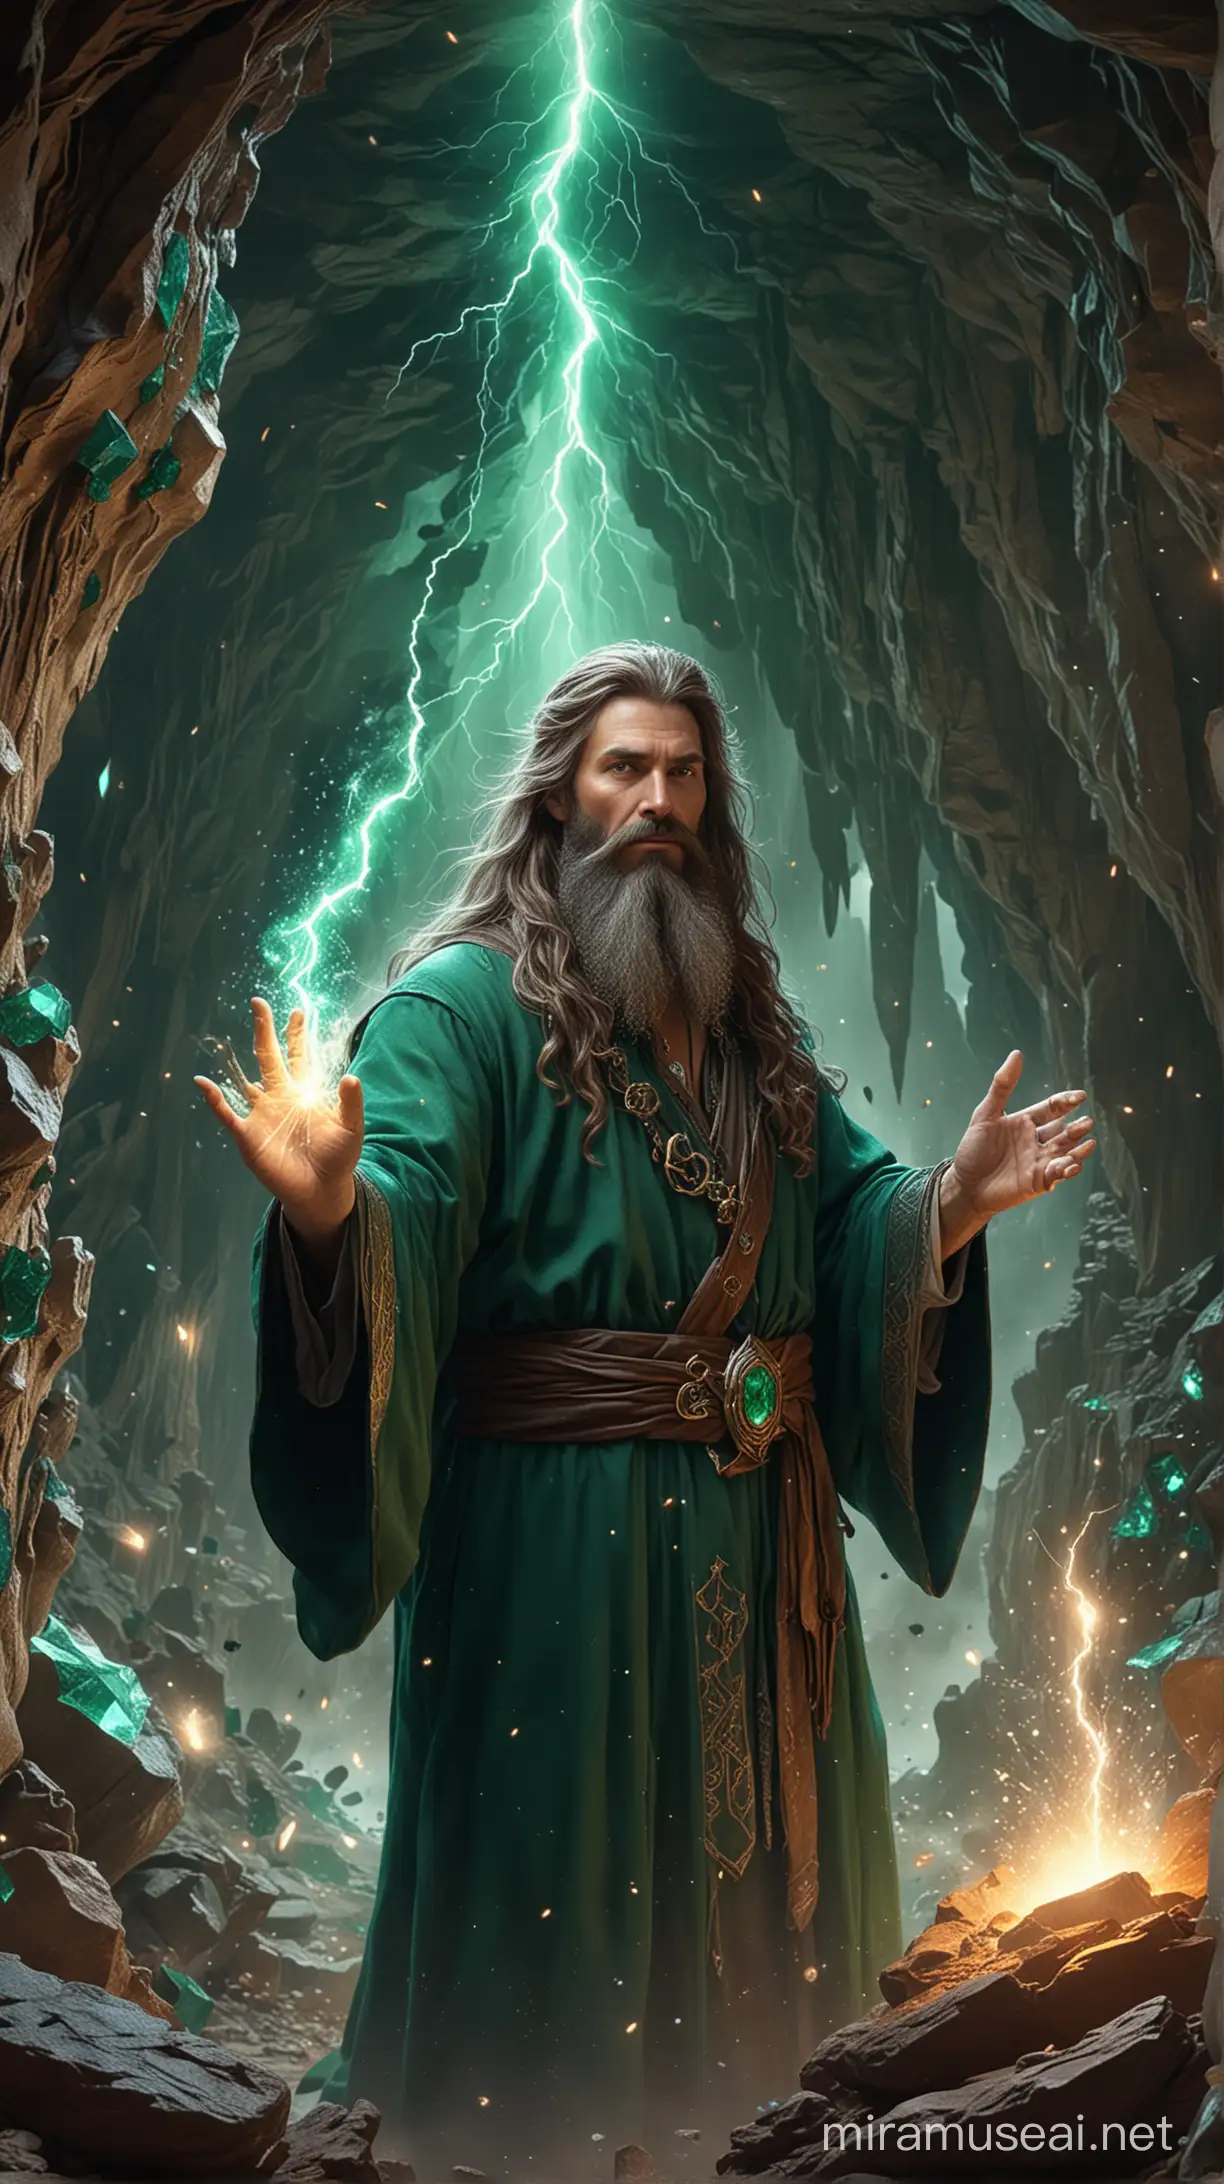 Majestic Wizard Conjouring Lightning in Emerald Crystal Cave